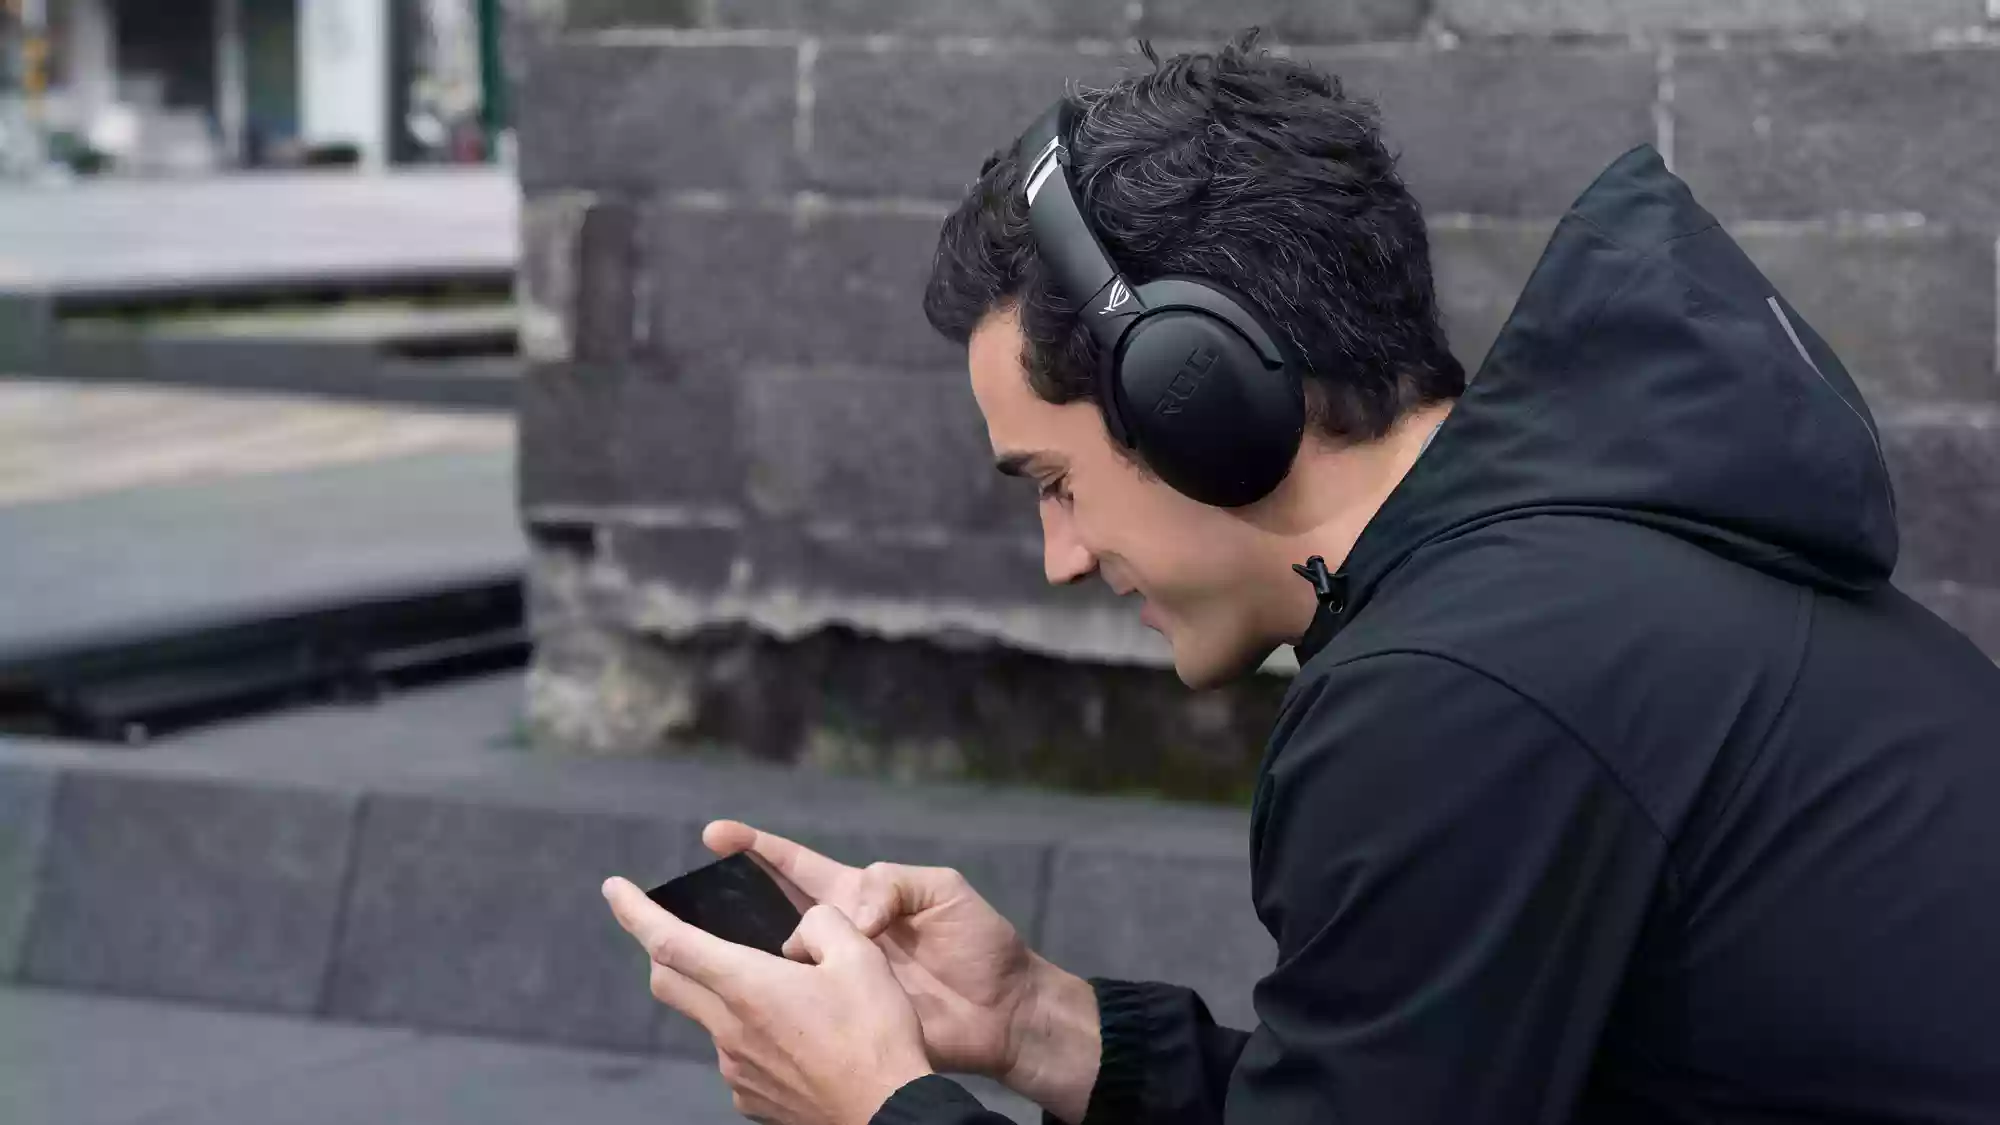 A man wearing ROG Strix Go BT headphones playing games on an ROG Phone outside on the street.